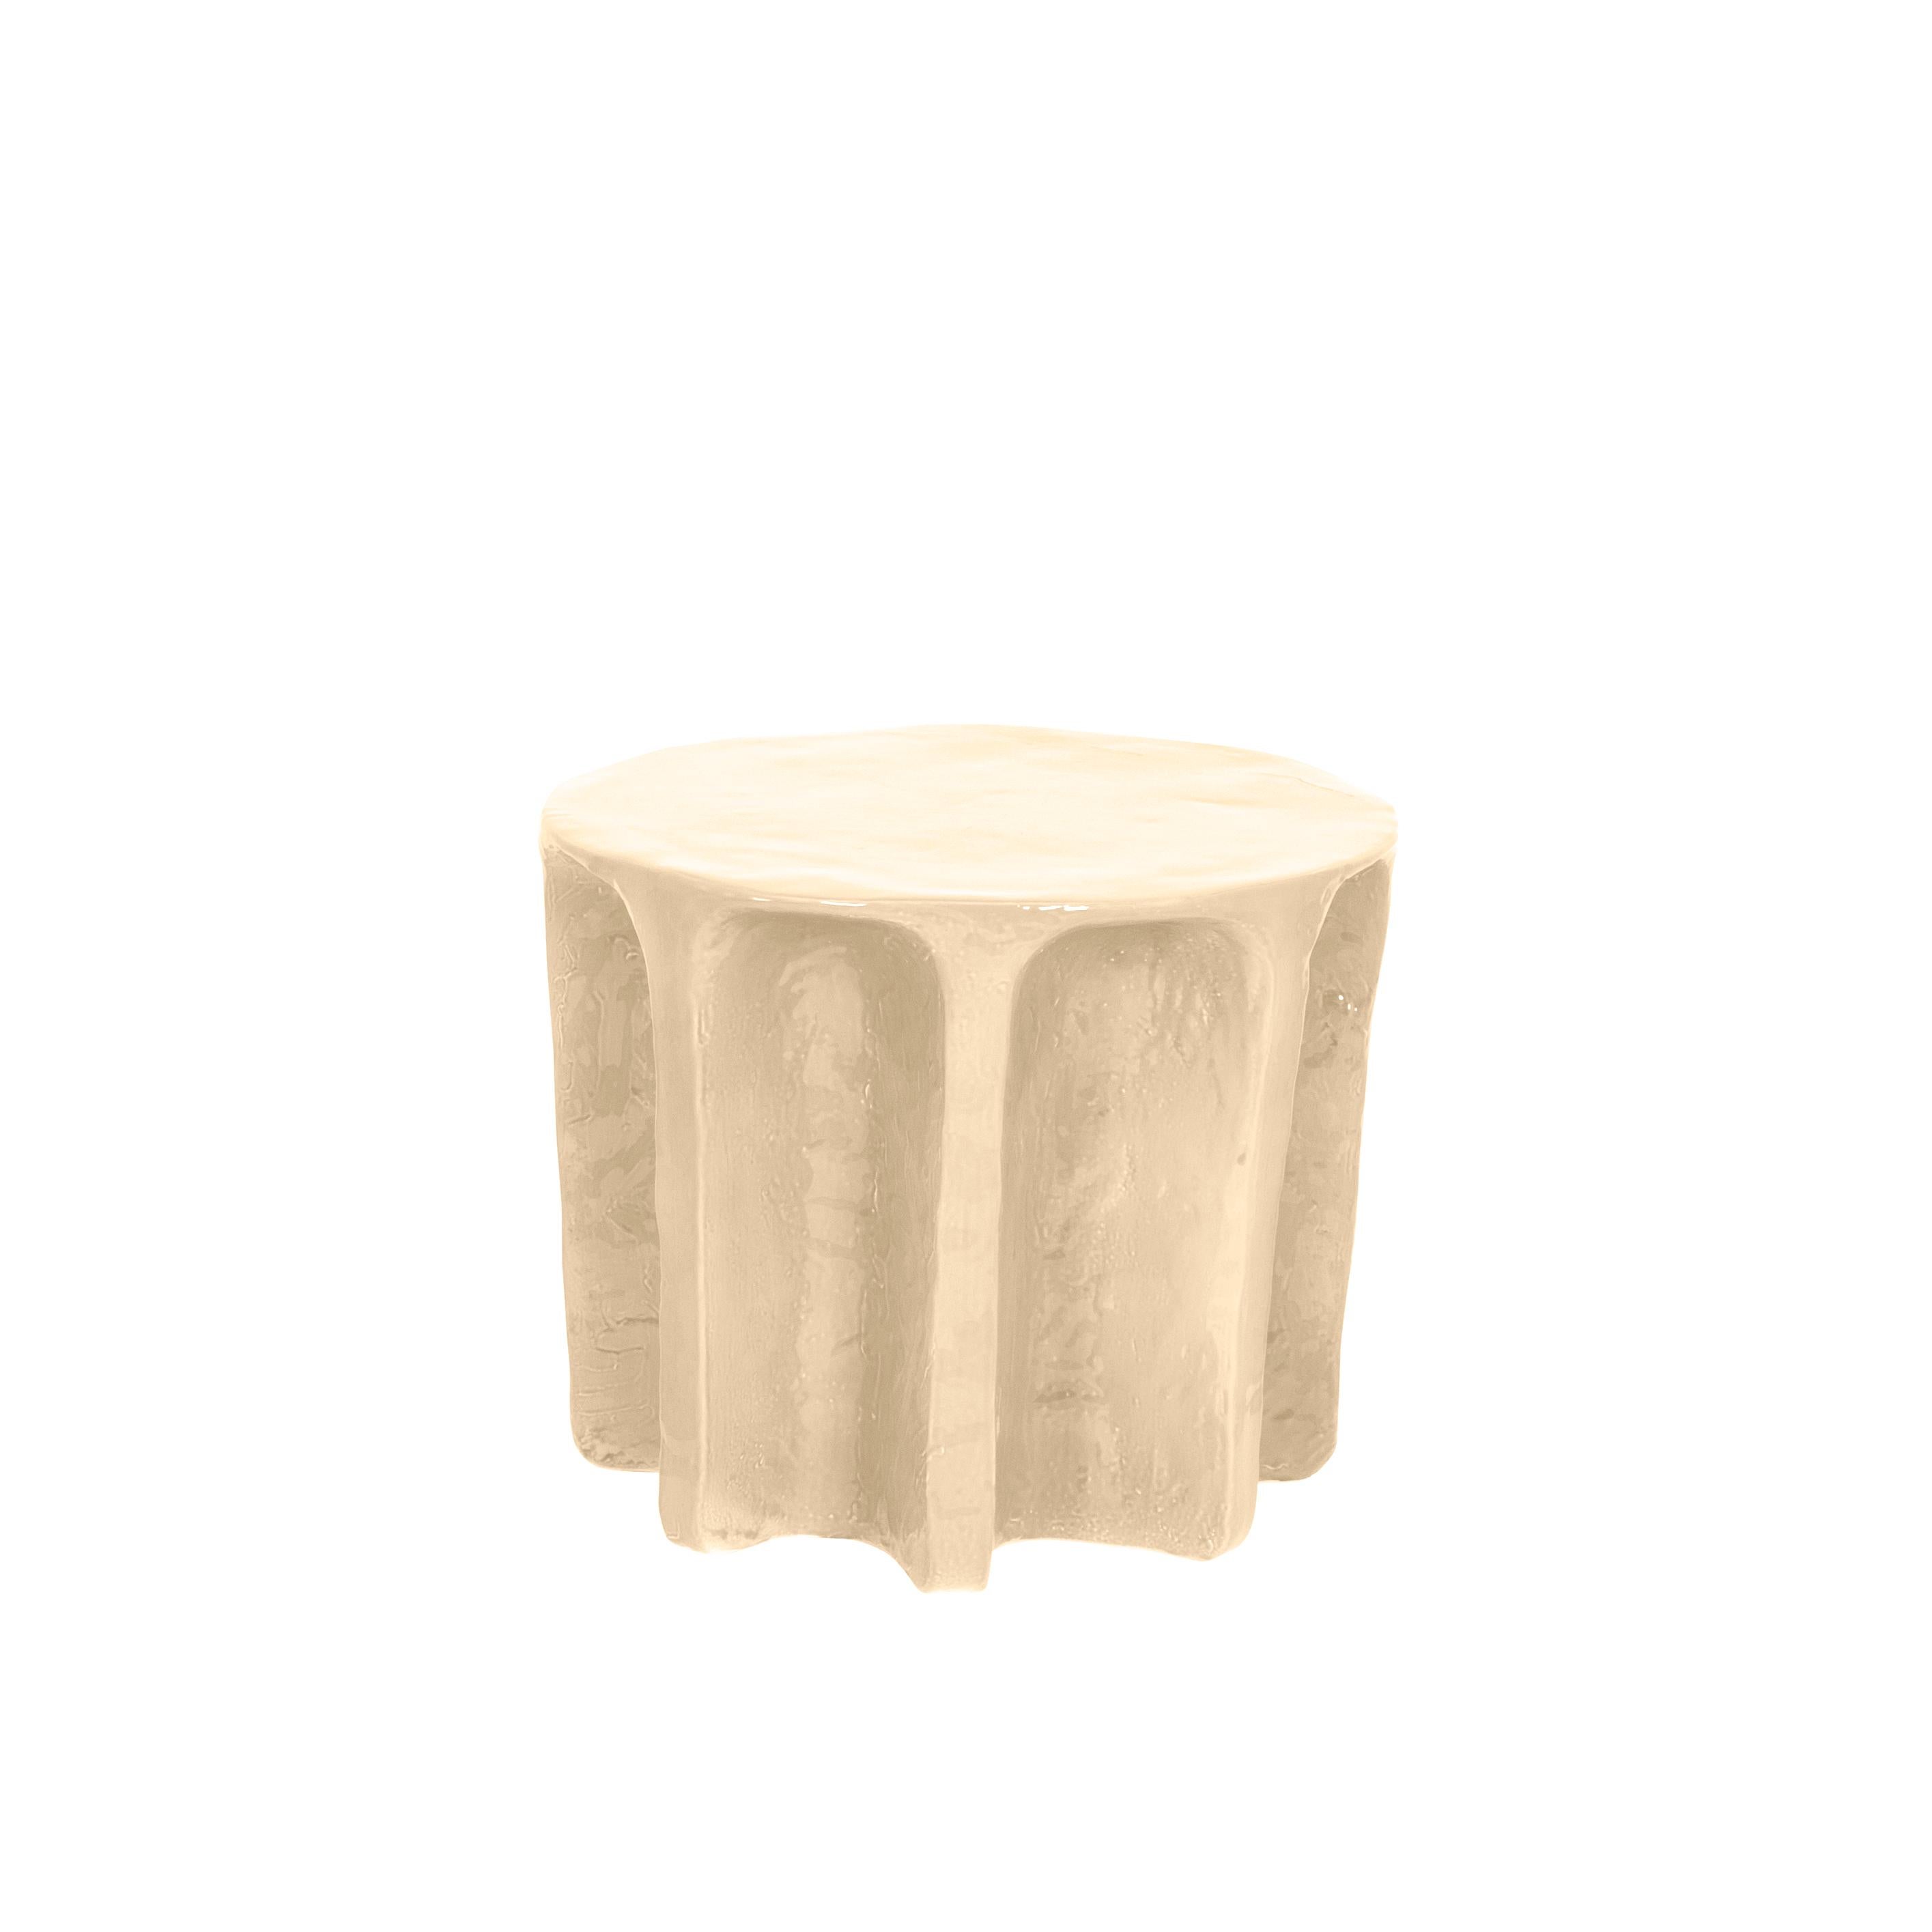 Chouchou Round Sand Coffee Table by Pulpo
Dimensions: D55 x H45 cm
Materials: ceramic

Also available in different Colours.

Chouchou bears the contours of an antique column – which, knowing designer Lorenzo Zanovello’s, is most likely a